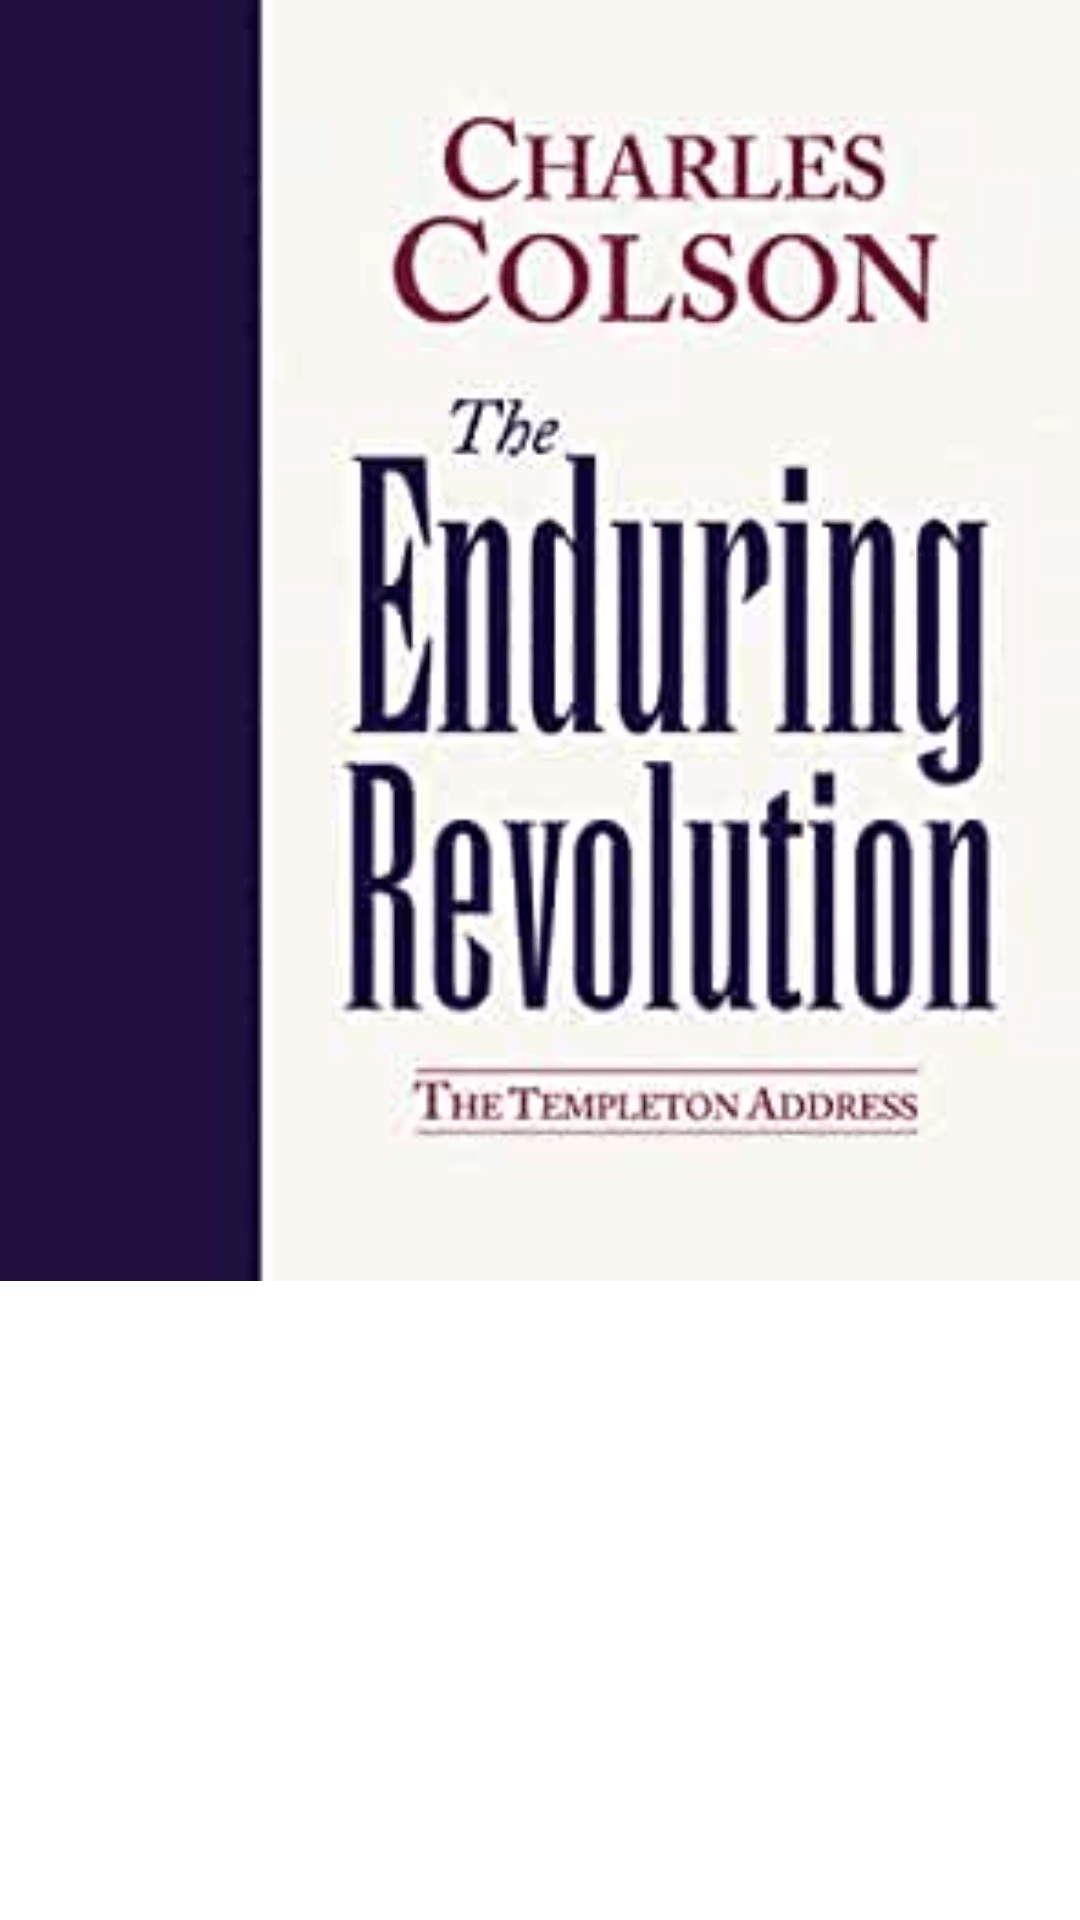 Enduring Revolution by Charles Colson